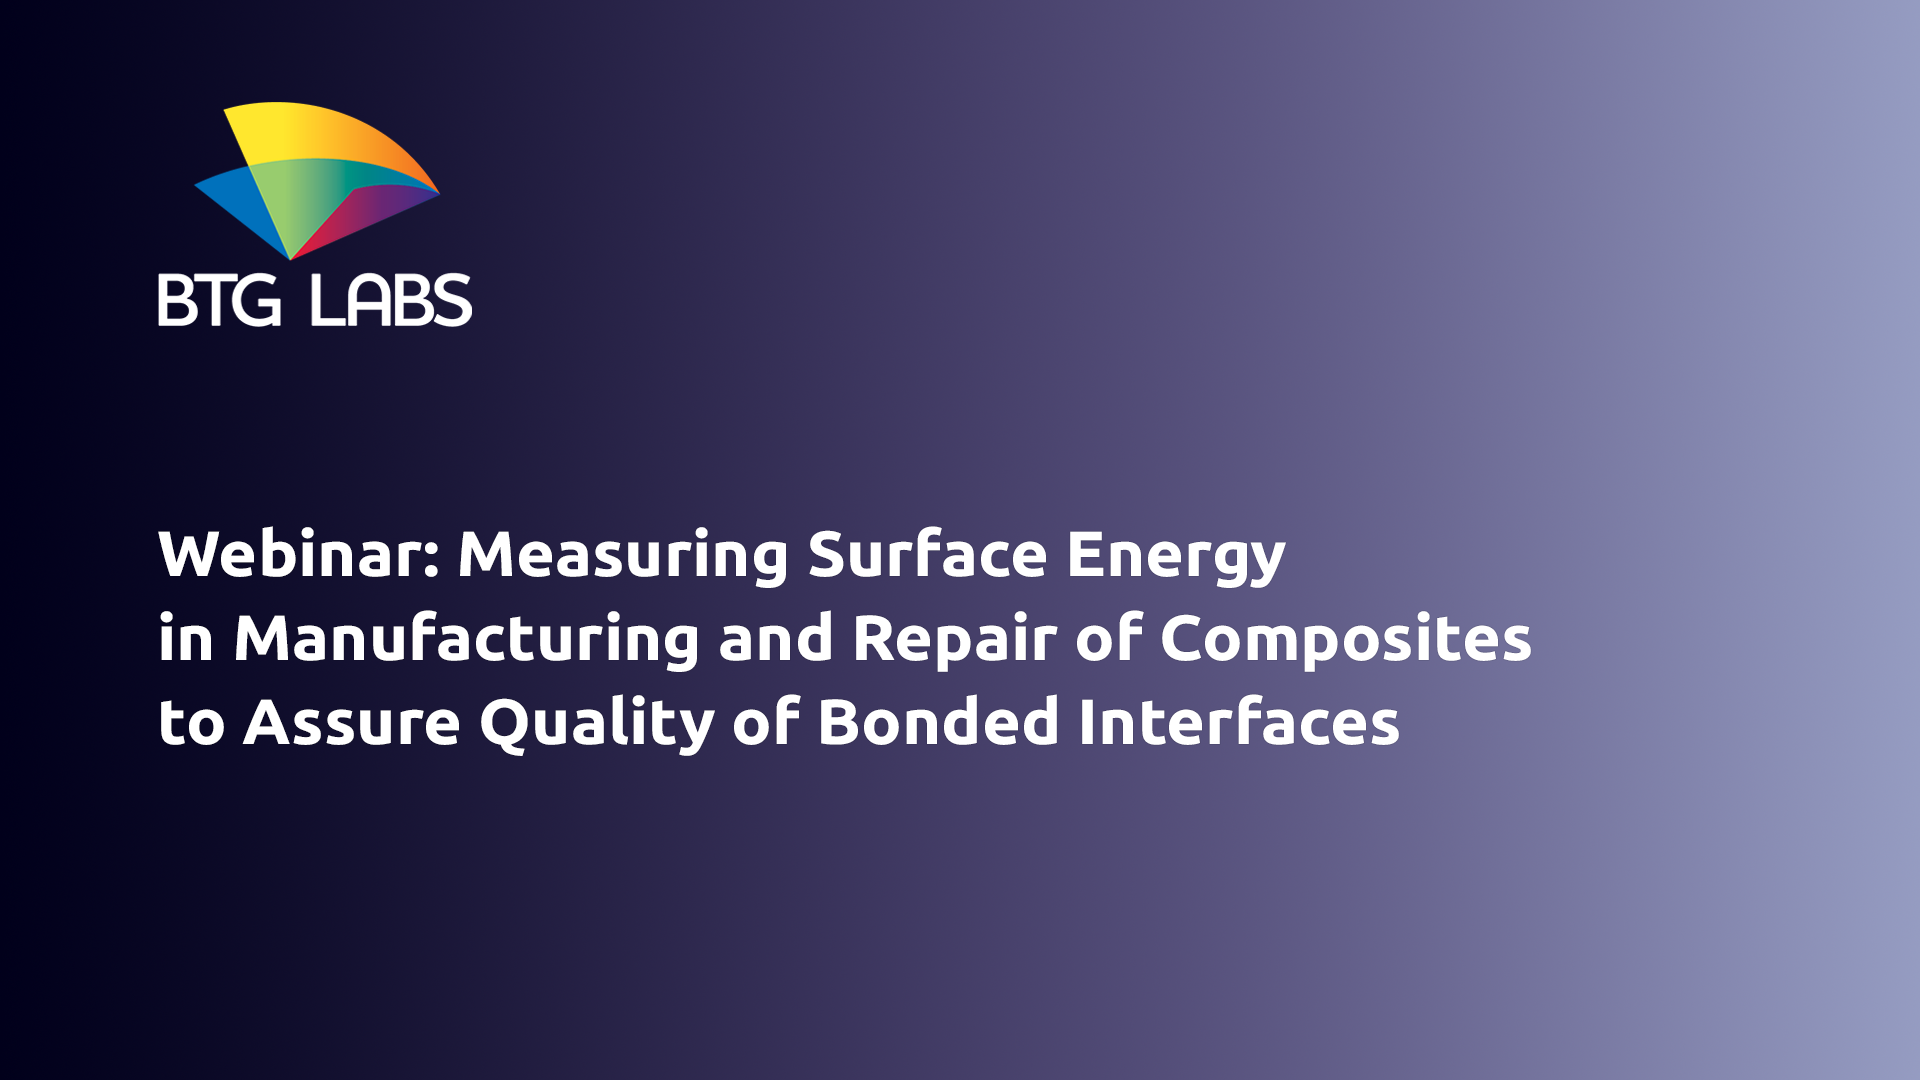 Webinar: Measuring Surface Energy in Manufacturing and Repair of Composites to Assure Quality of Bonded Interfaces